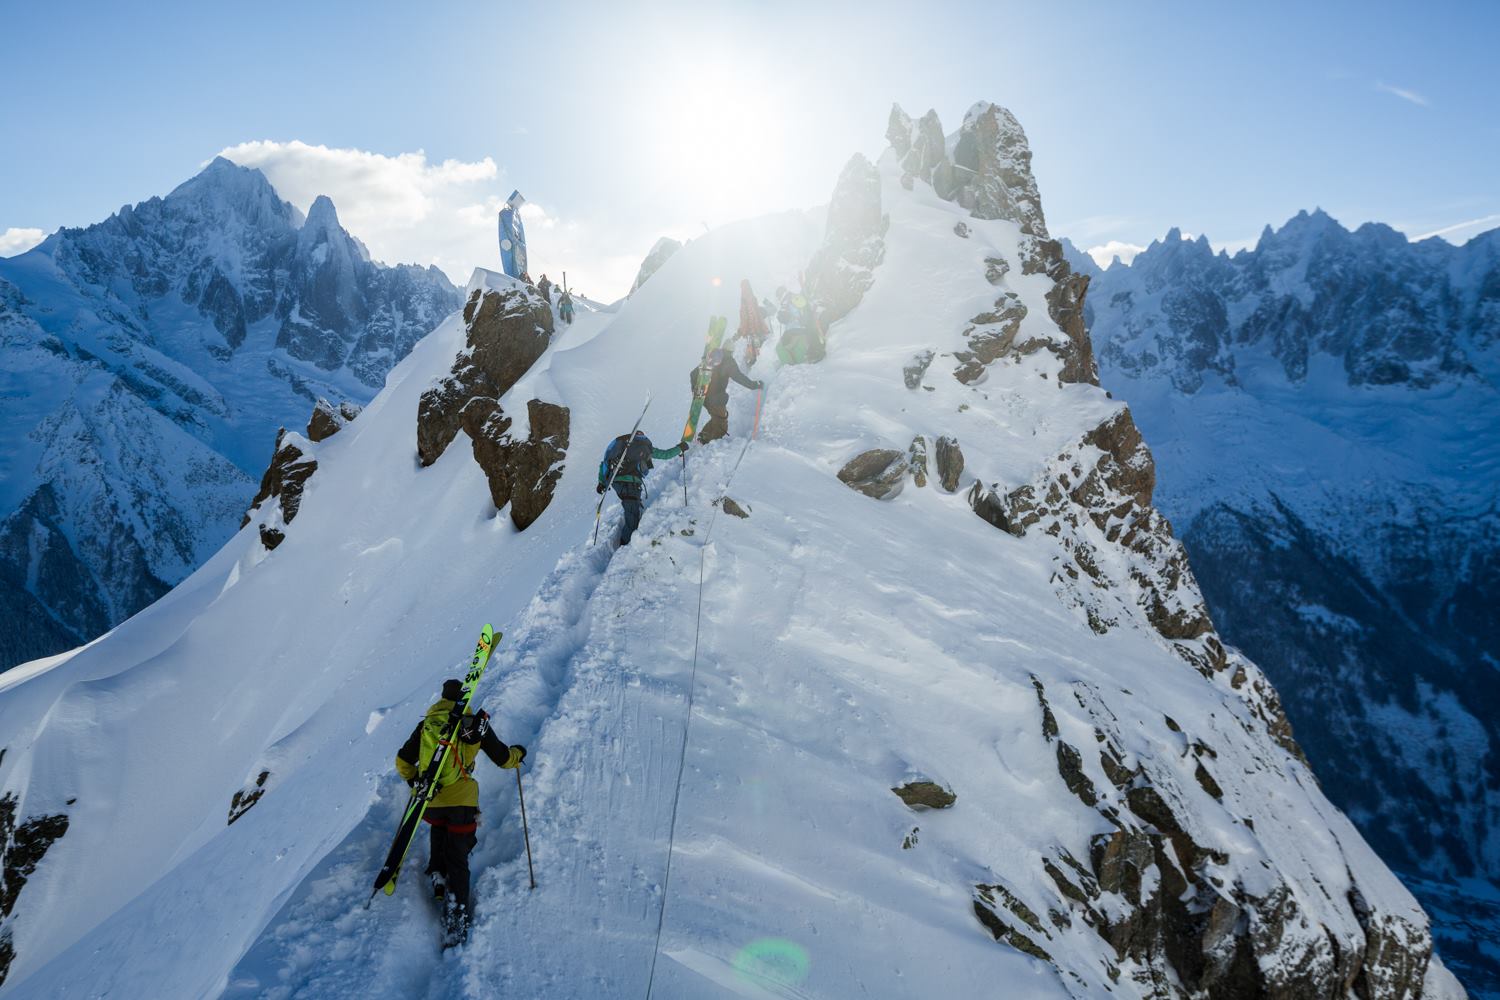 Exactly three weeks left and FWT riders will be hiking up in Chamonix-Mont-Blanc again, battling for the first win of the season. // photo: Jeremy Bernard (Facebook)